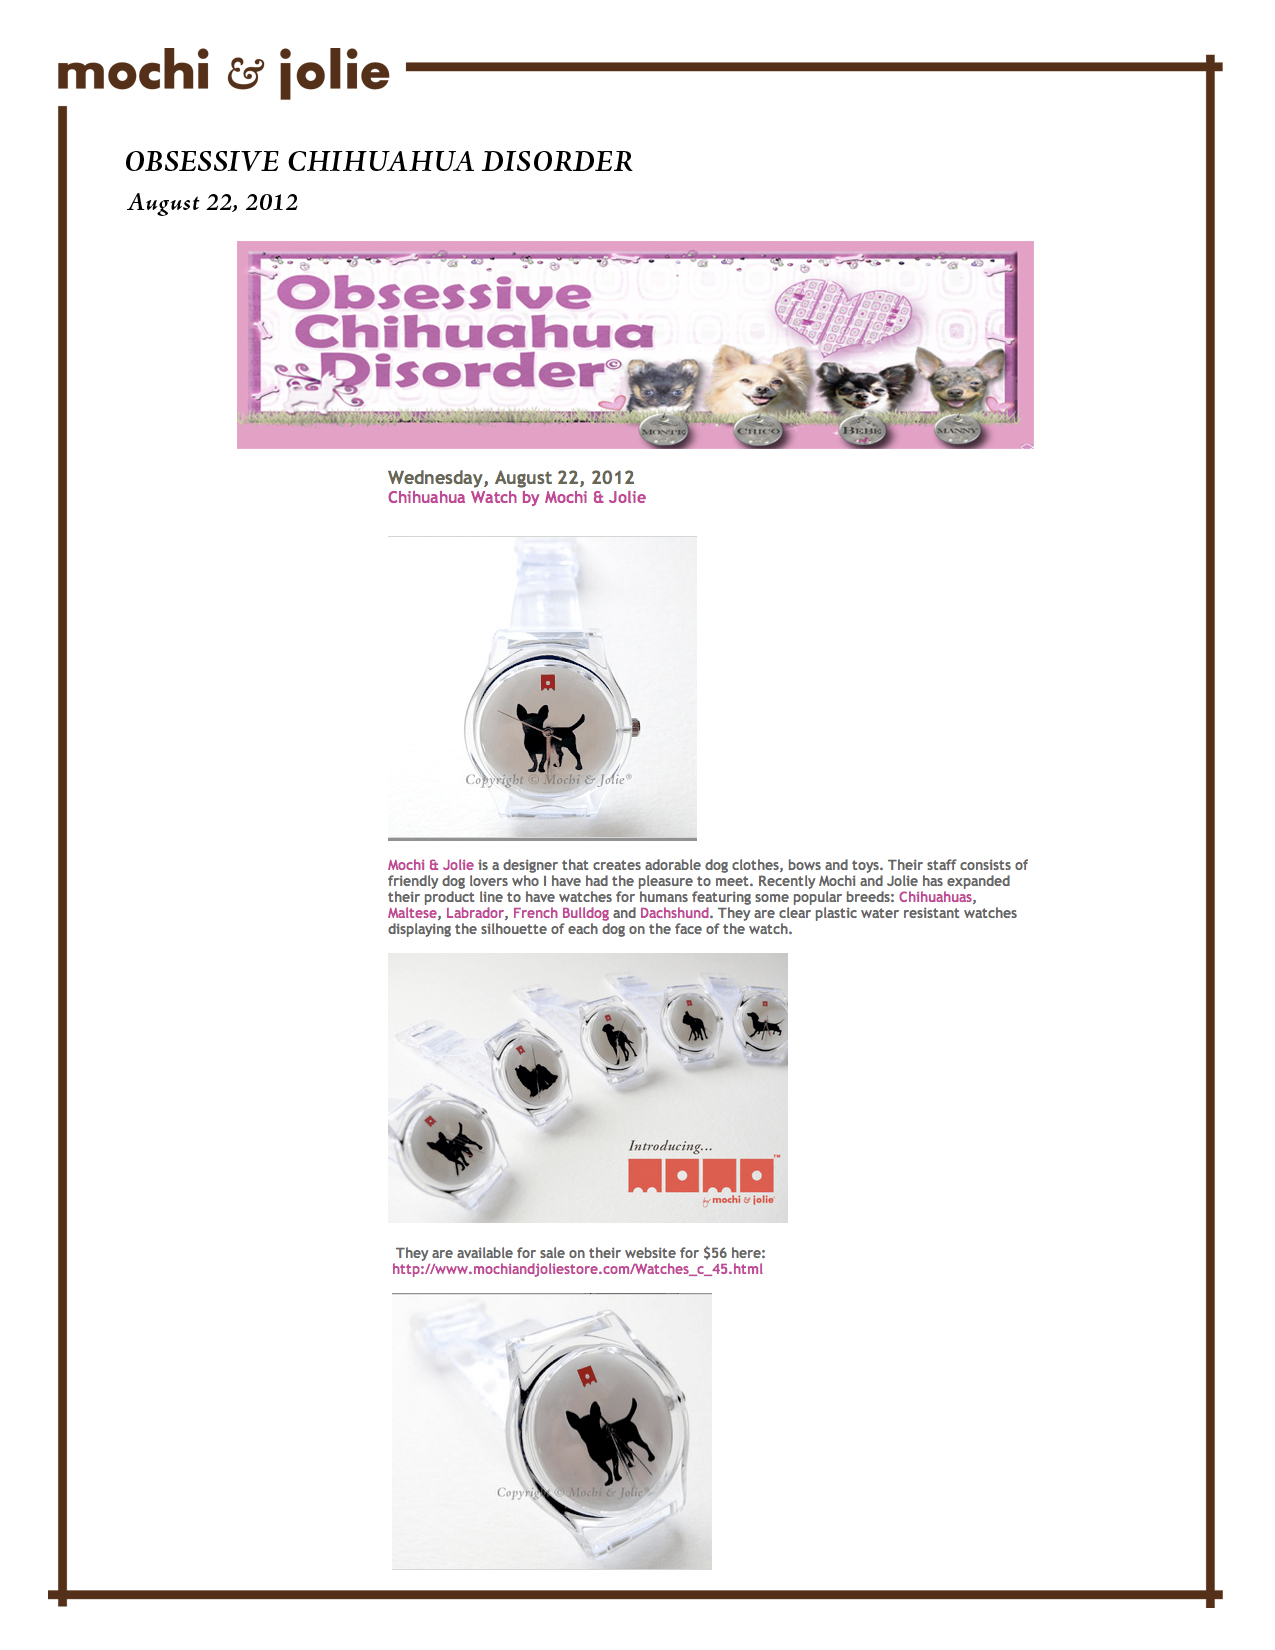 Obsessive Chihuahua Disorder (August 22, 2012)